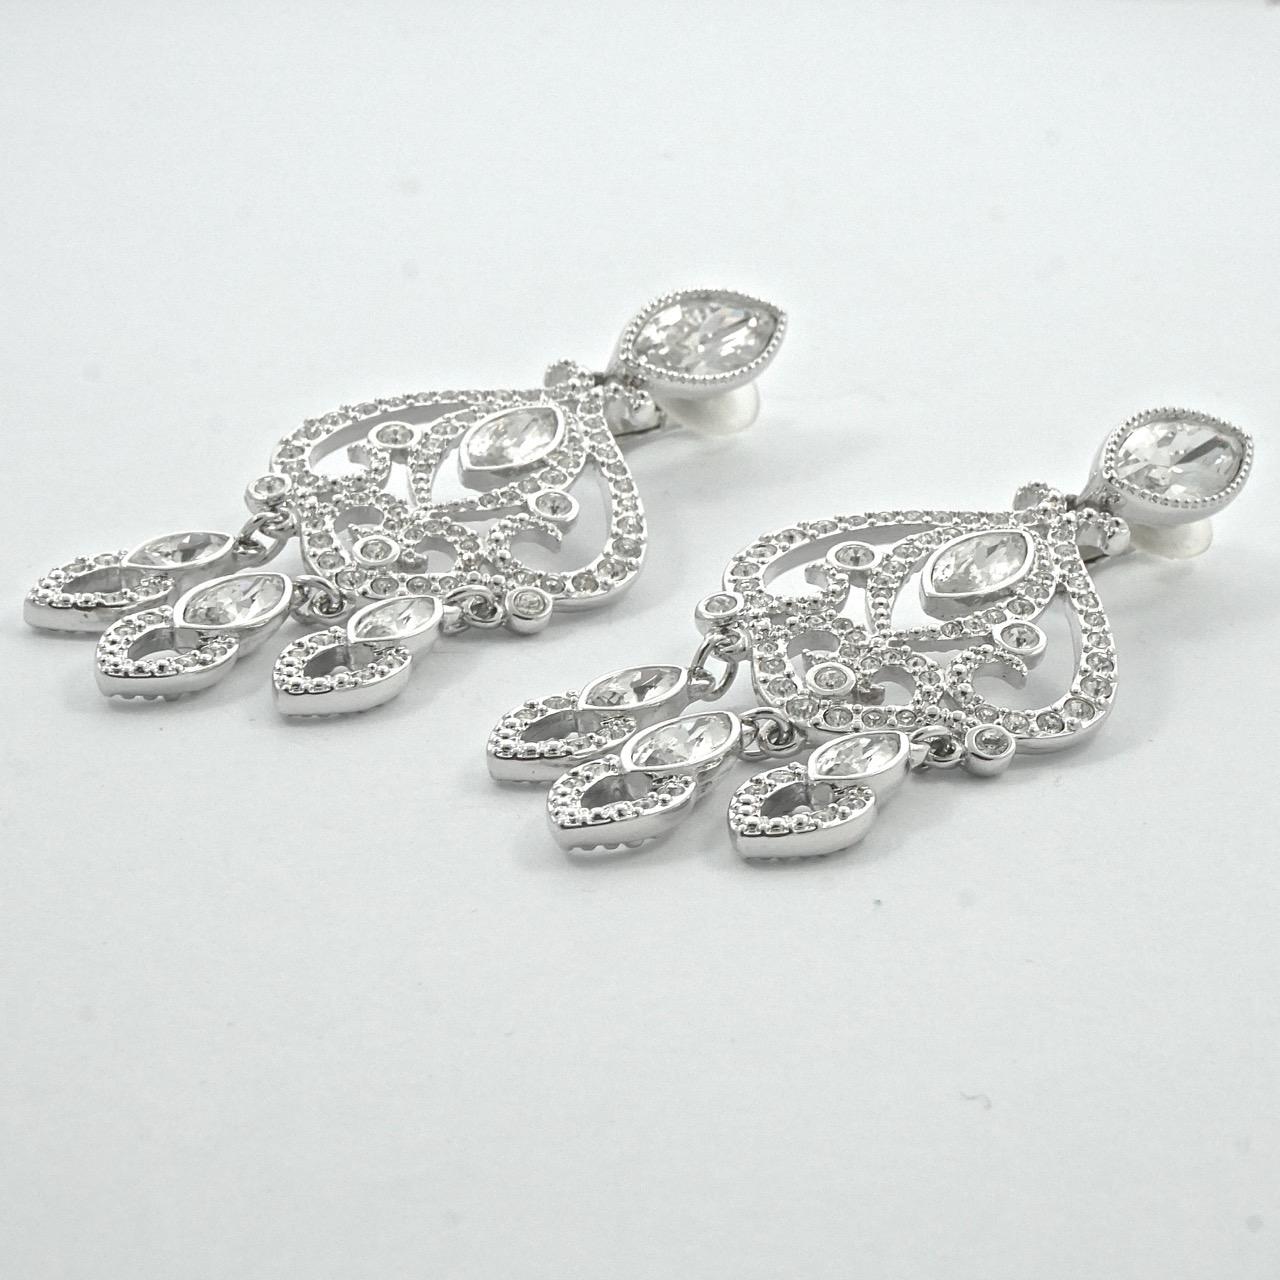 Swarovski Silver Tone Marquise and Round Crystal Swan Logo Chandelier Earrings For Sale 3